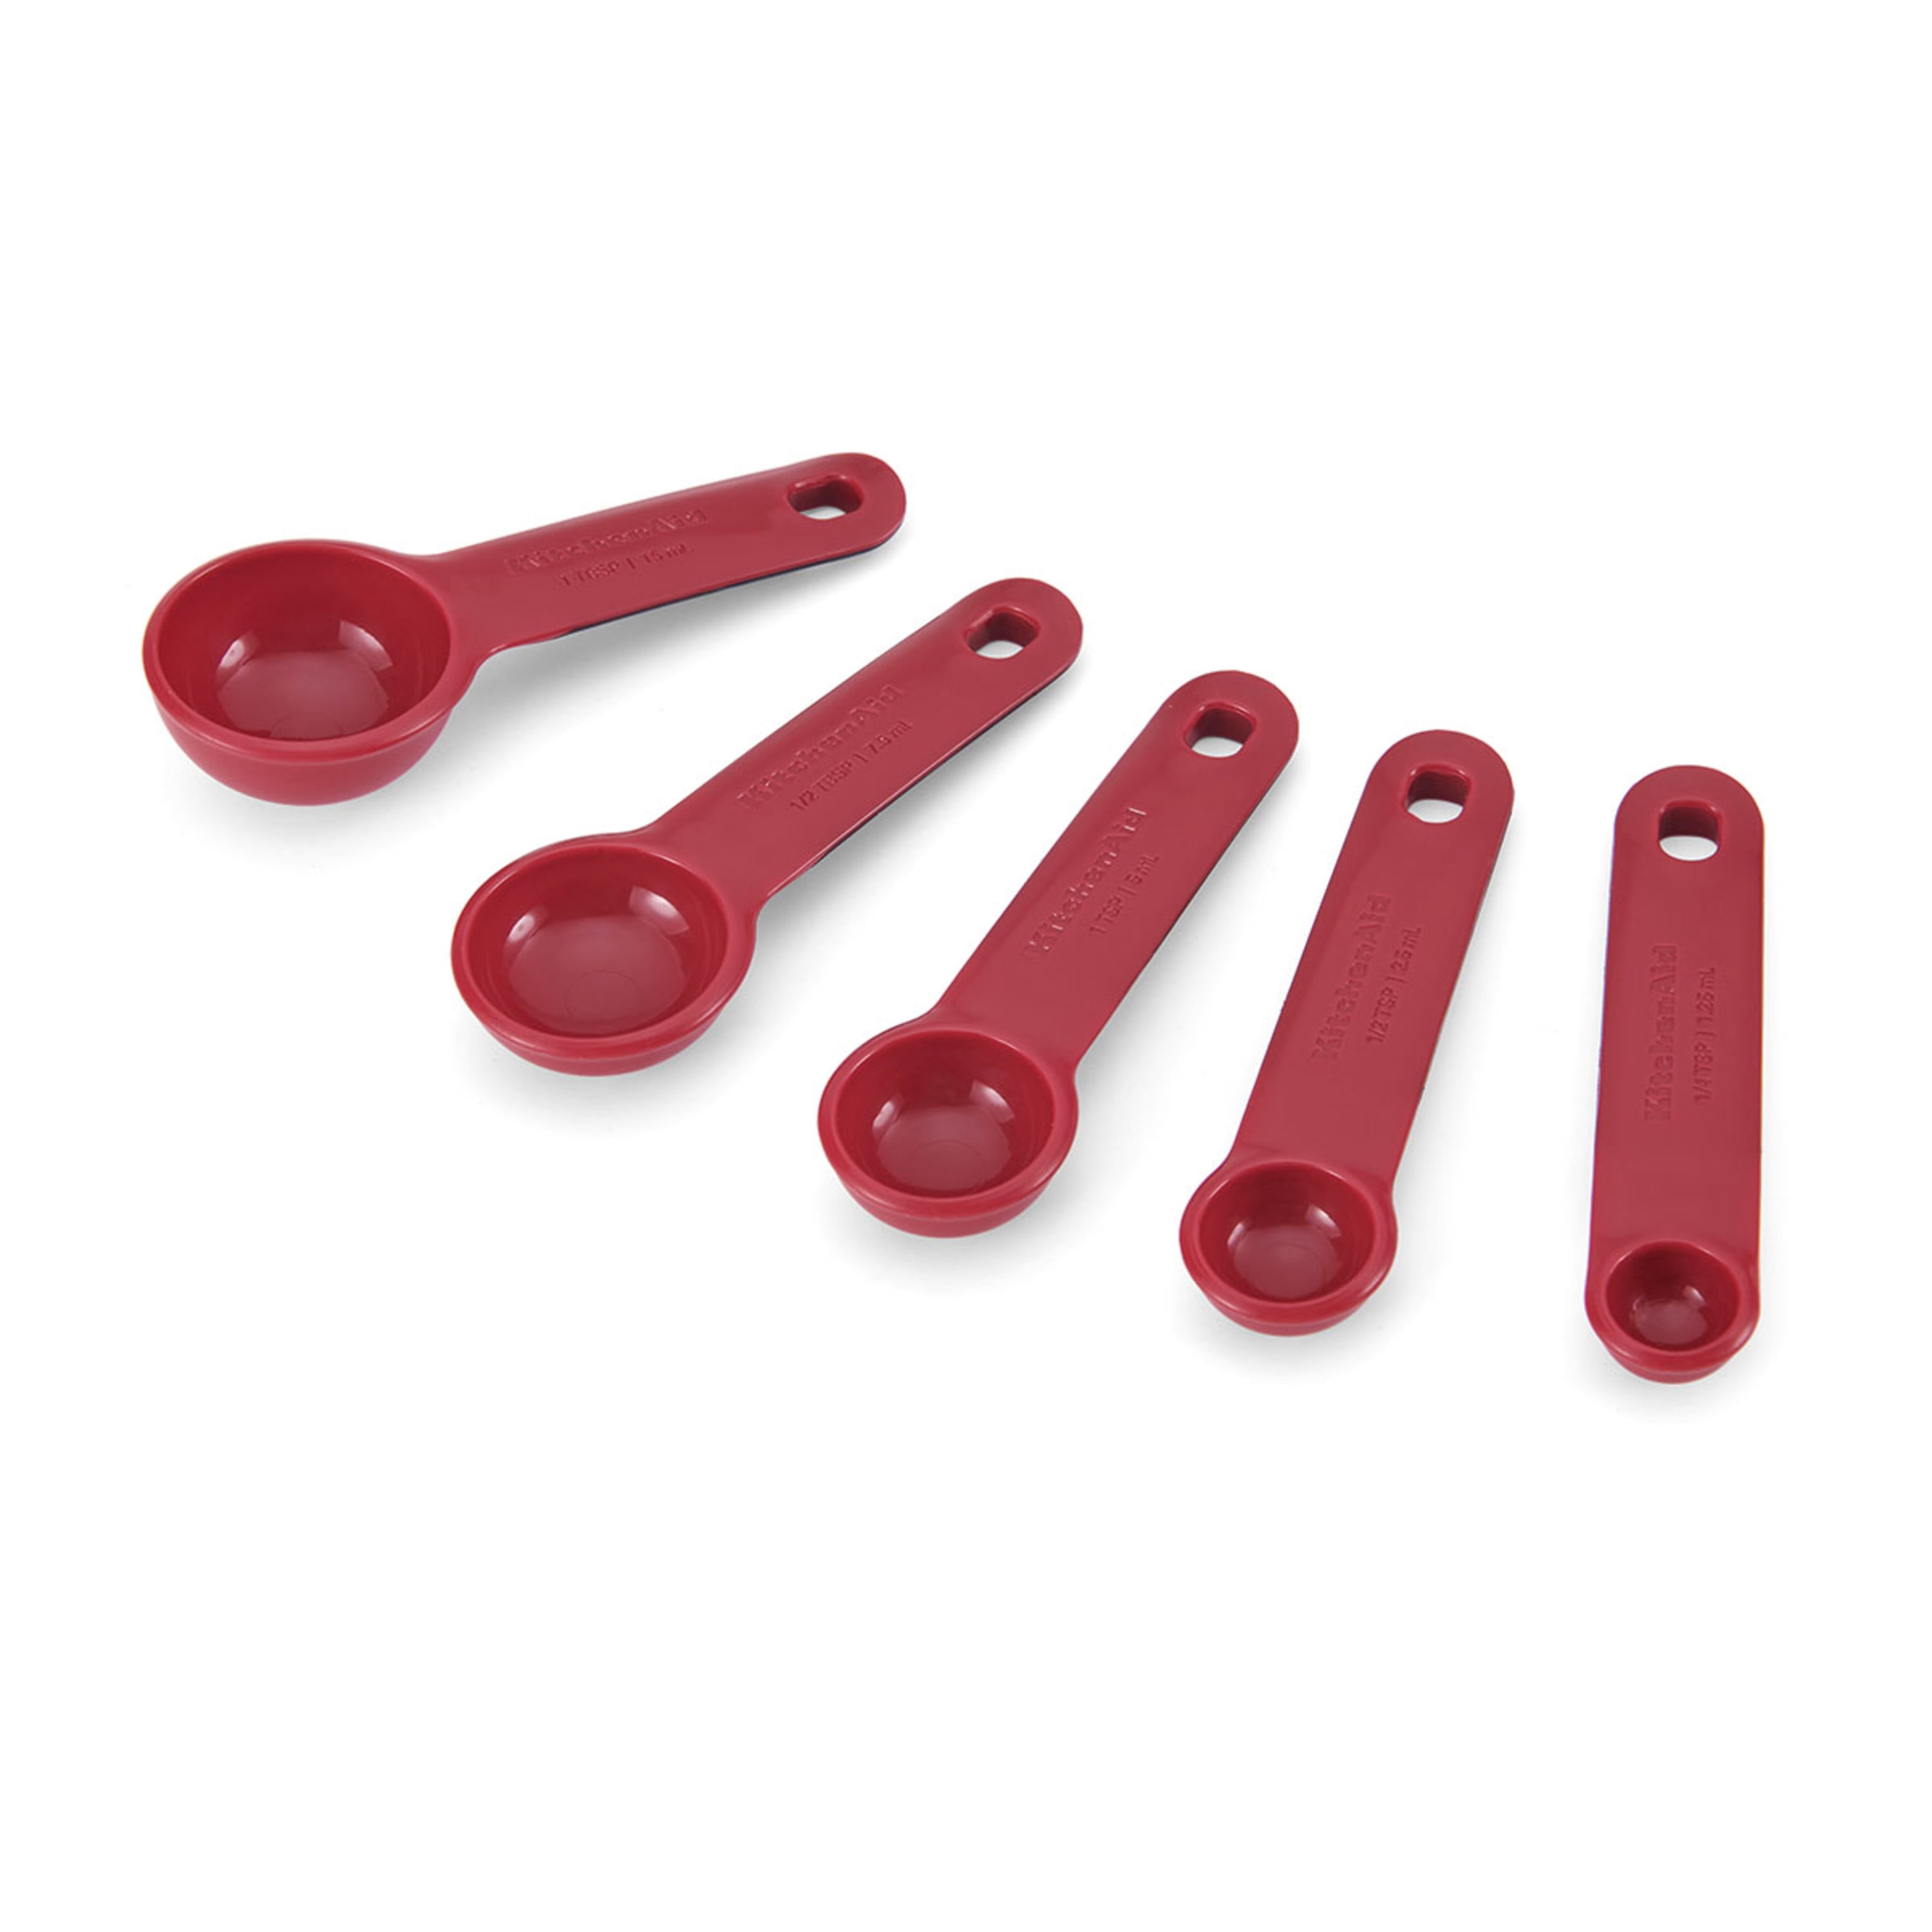 KitchenAid Universal Measuring Spoon Set, Durable and Easy to Clean, Empire  Red, Set of 5